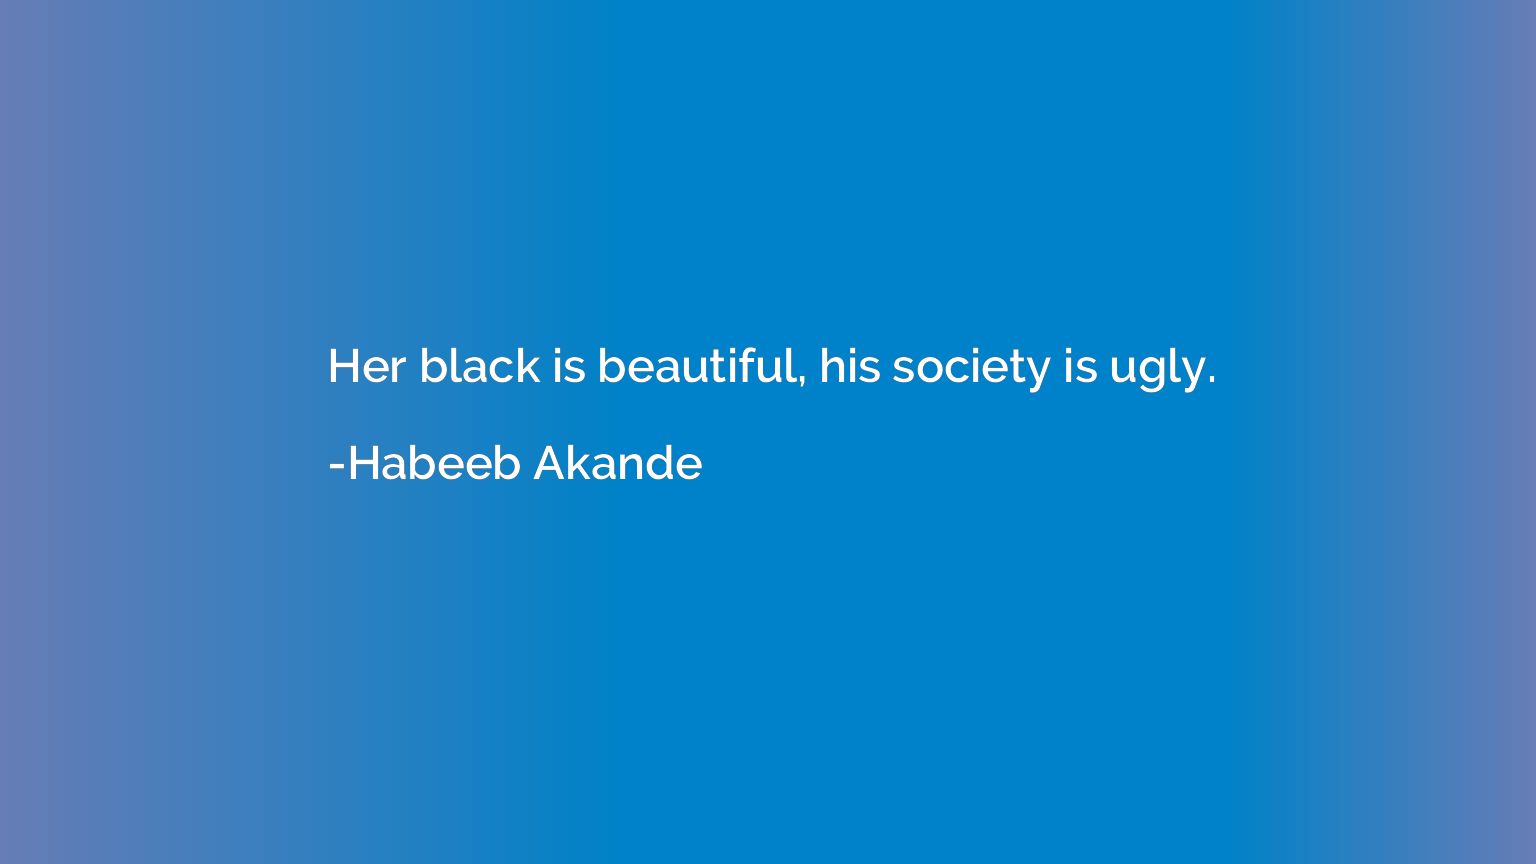 Her black is beautiful, his society is ugly.